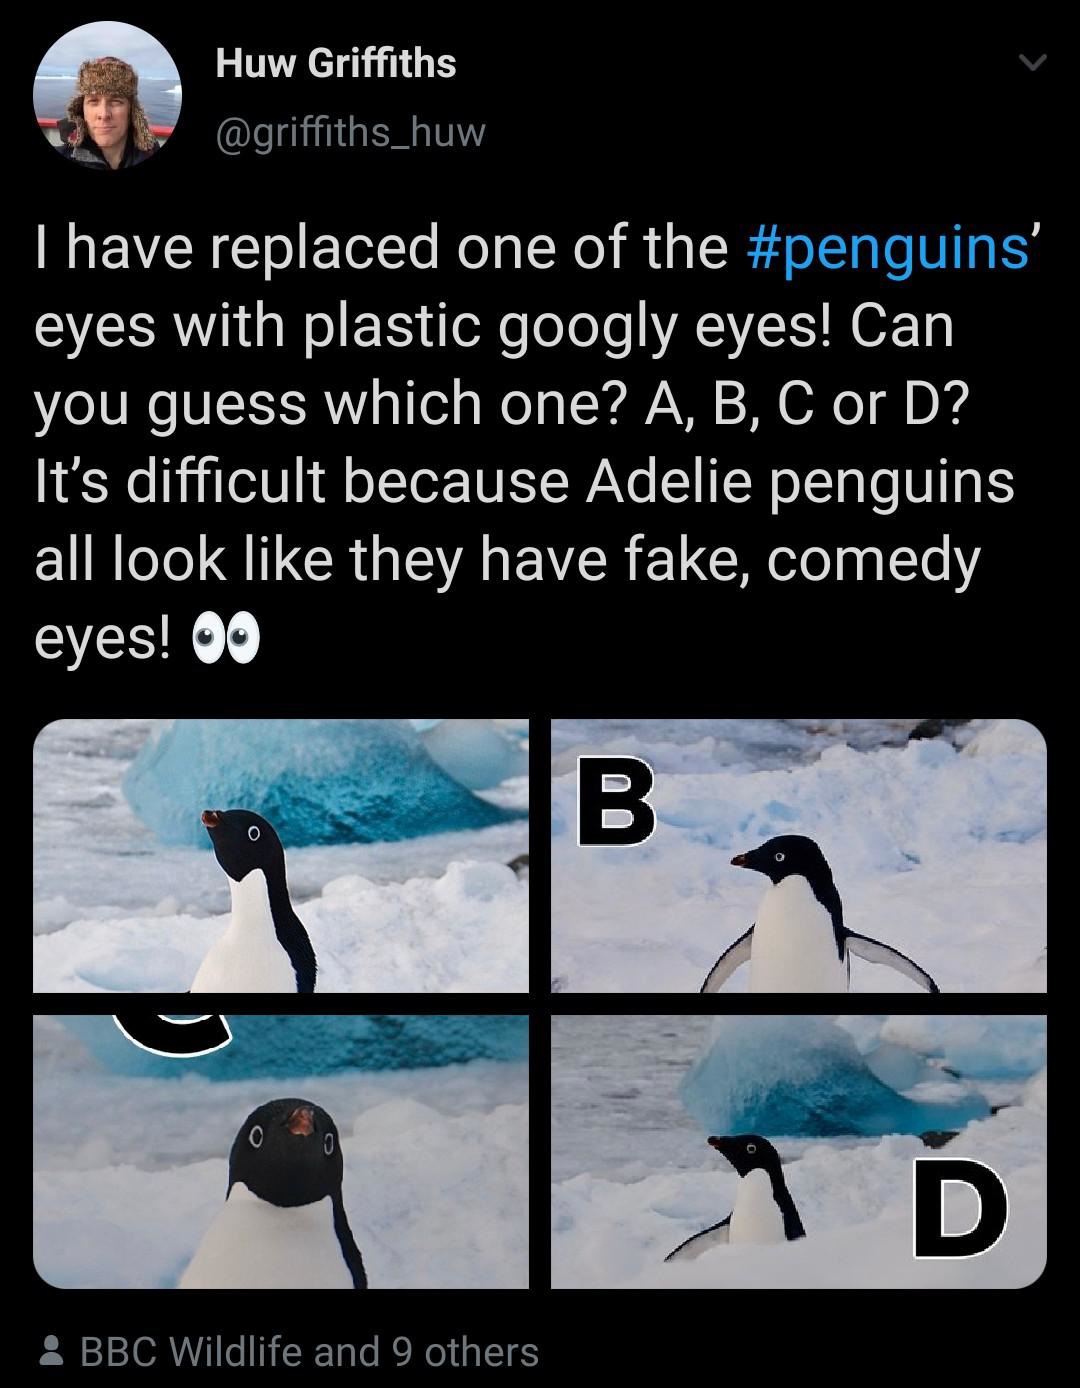 berau coal - Huw Griffiths Thave replaced one of the ' eyes with plastic googly eyes! Can you guess which one? A, B, C or D? It's difficult because Adelie penguins all look they have fake, comedy eyes! 00 Bbc Wildlife and 9 others